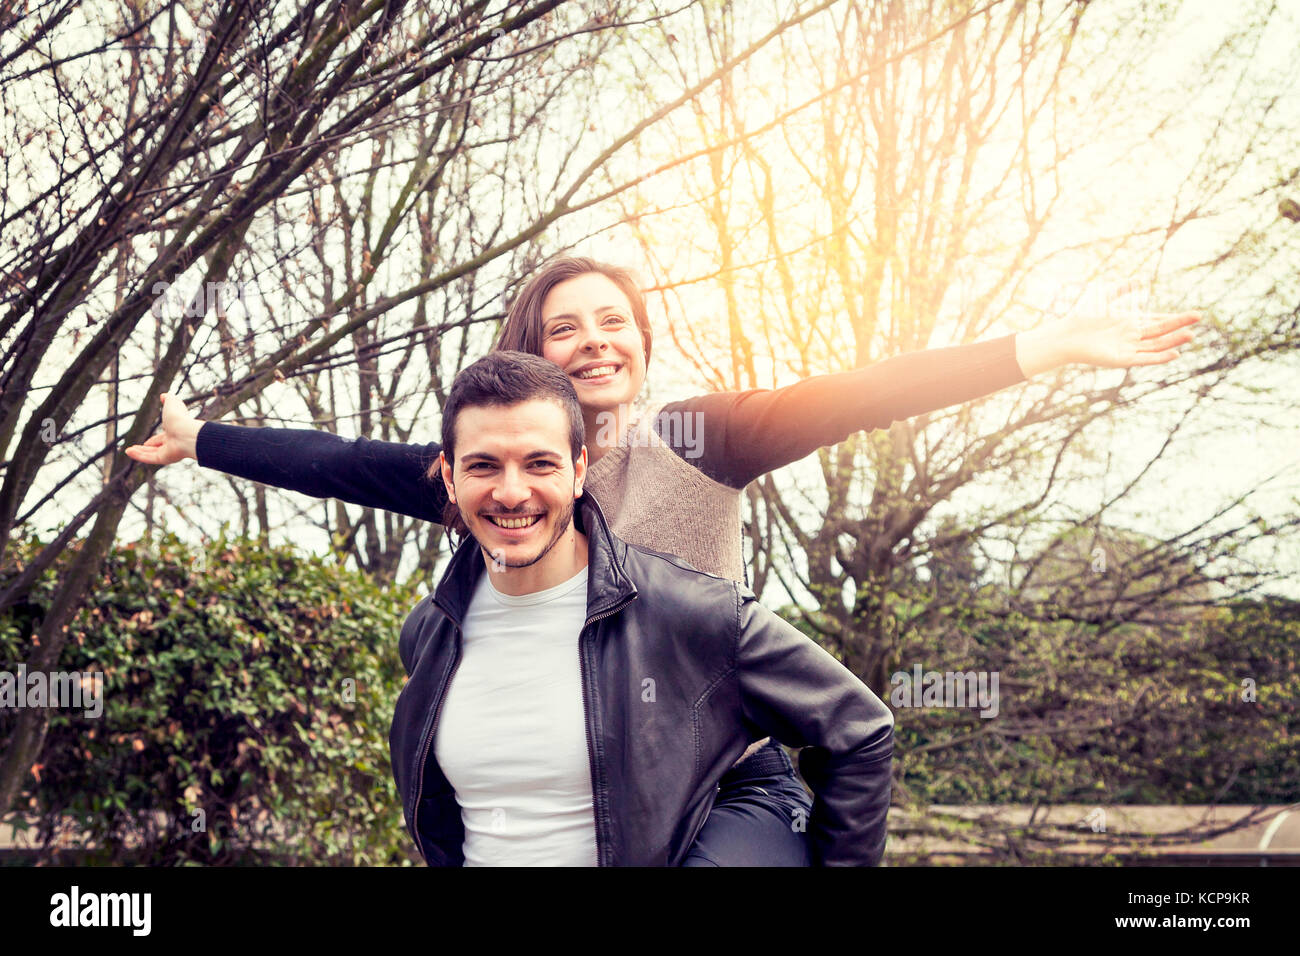 young boy have fun wearing her girlfriend on his shoulders over a wooden deck Stock Photo